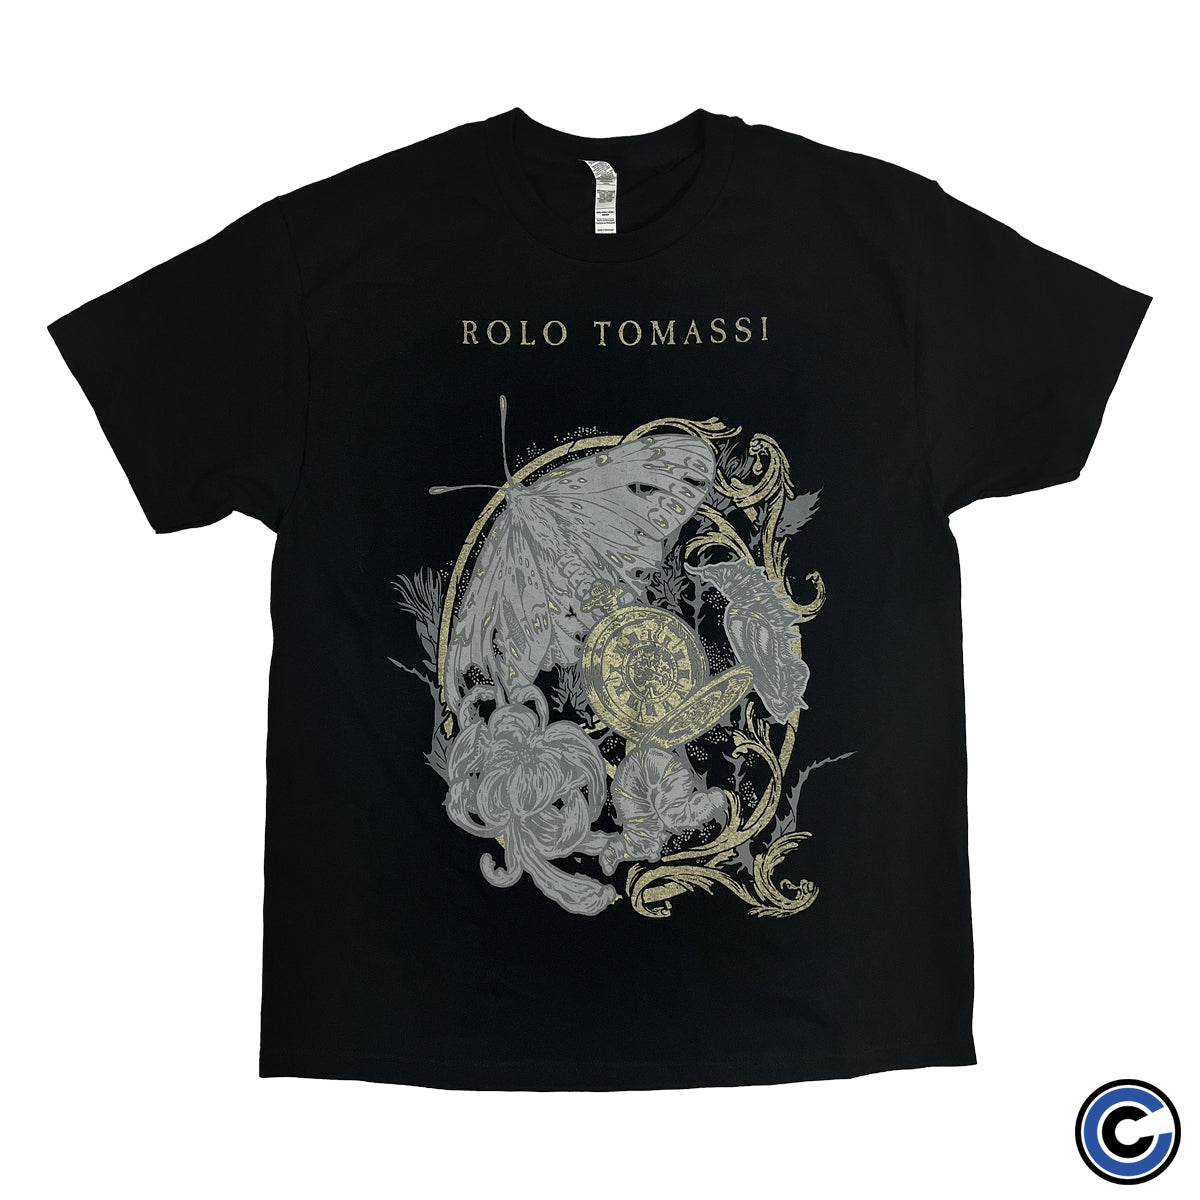 Rolo Tomassi "Butterfly" Shirt